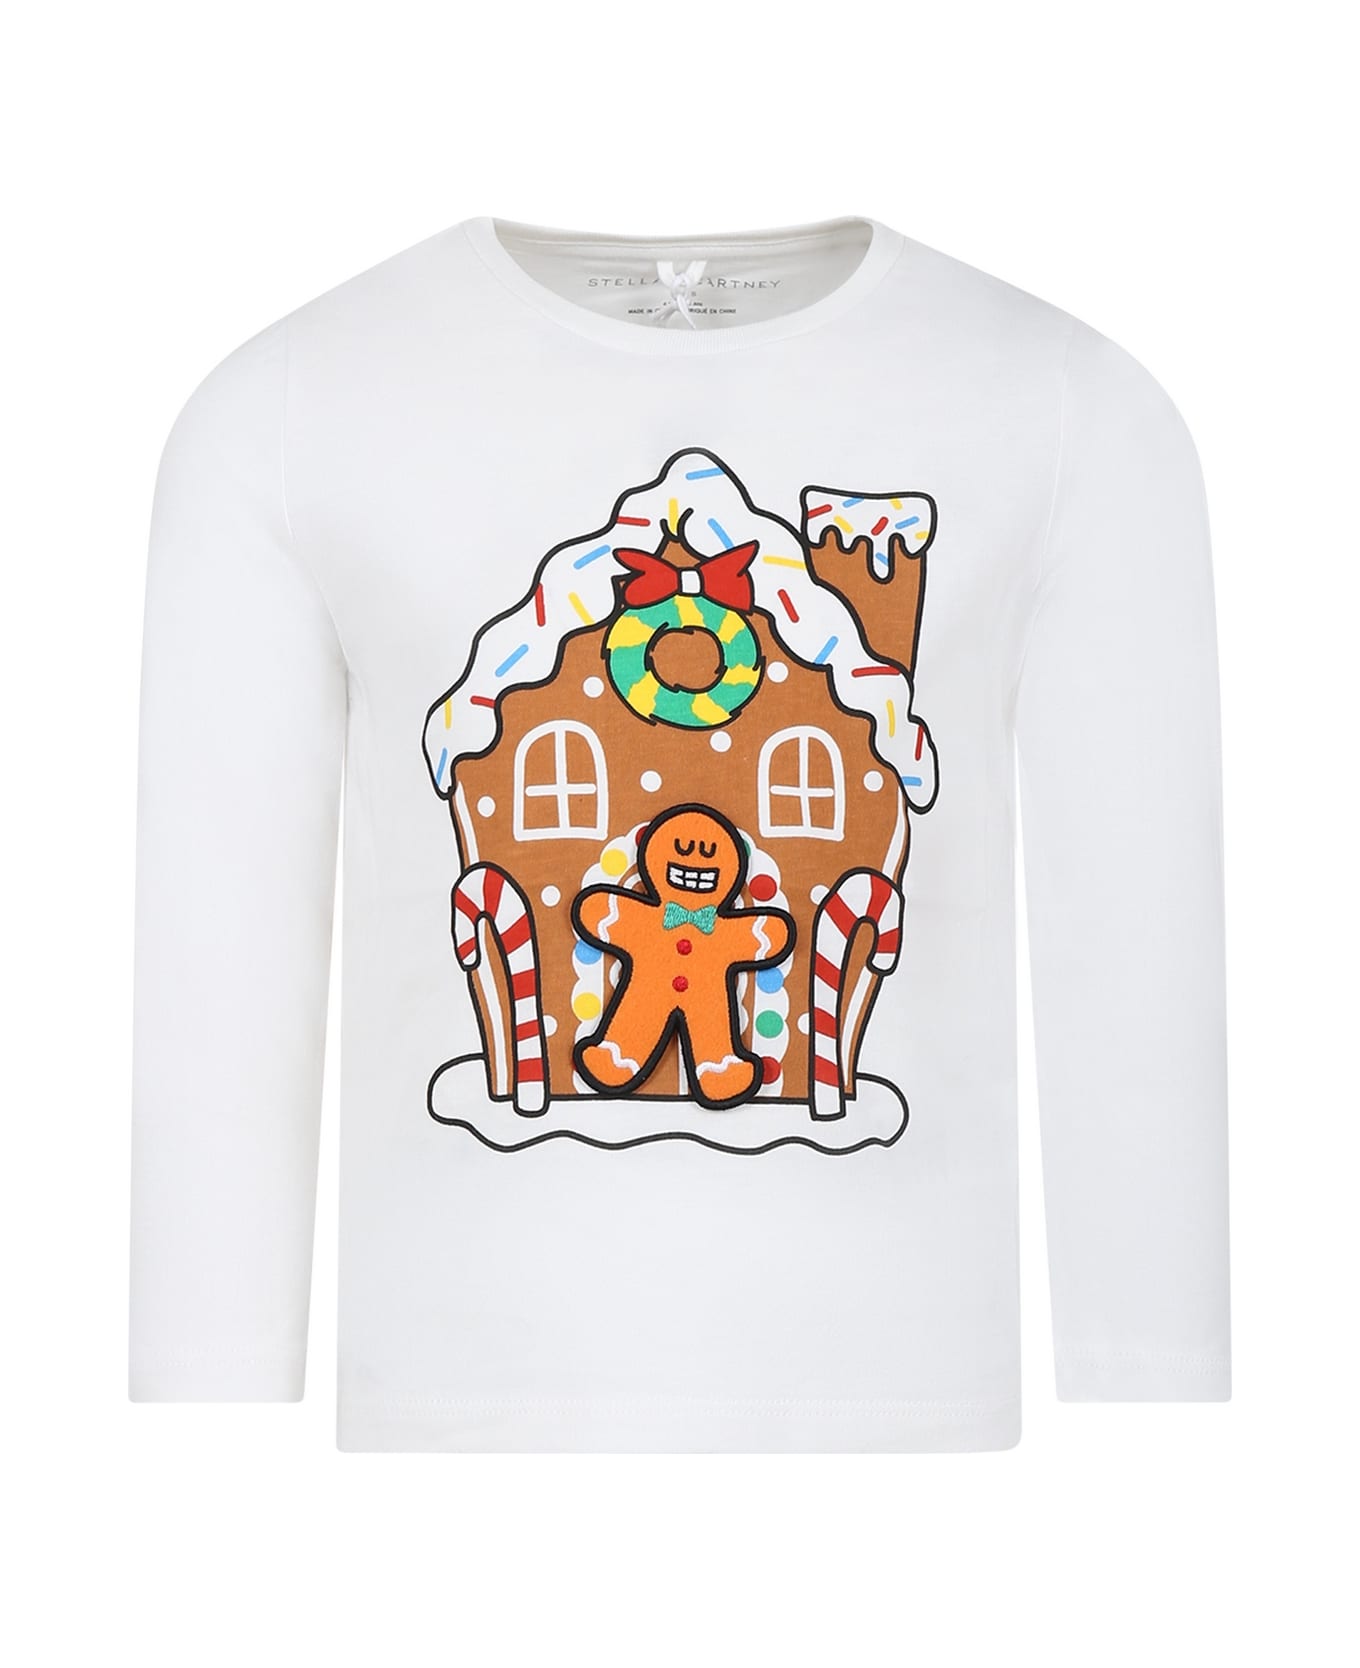 Stella McCartney Kids White T-shirt For Boy With Printed Gingerbread House - White